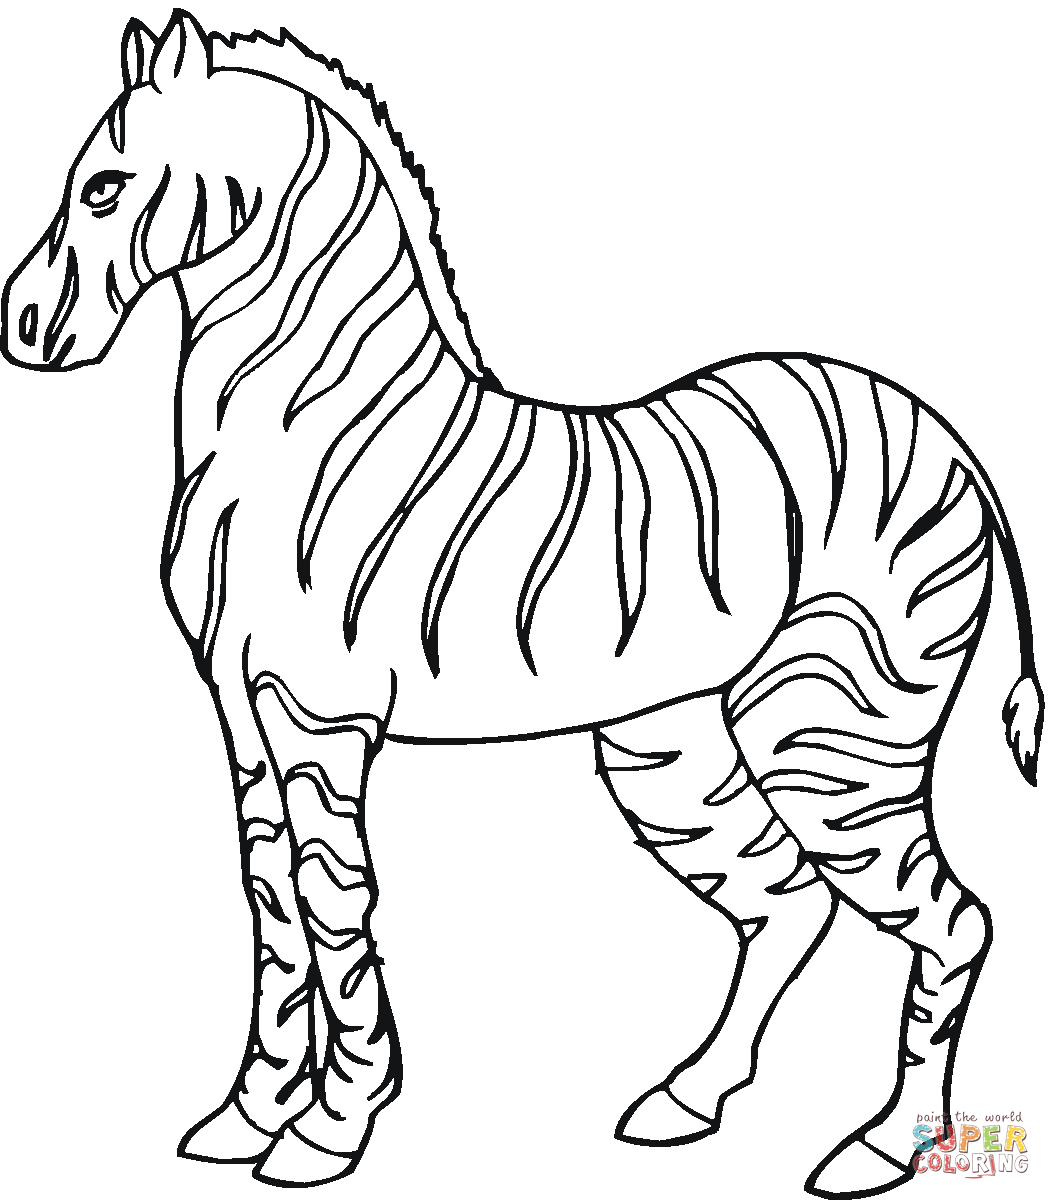 Zebra coloring pages to download and print for free